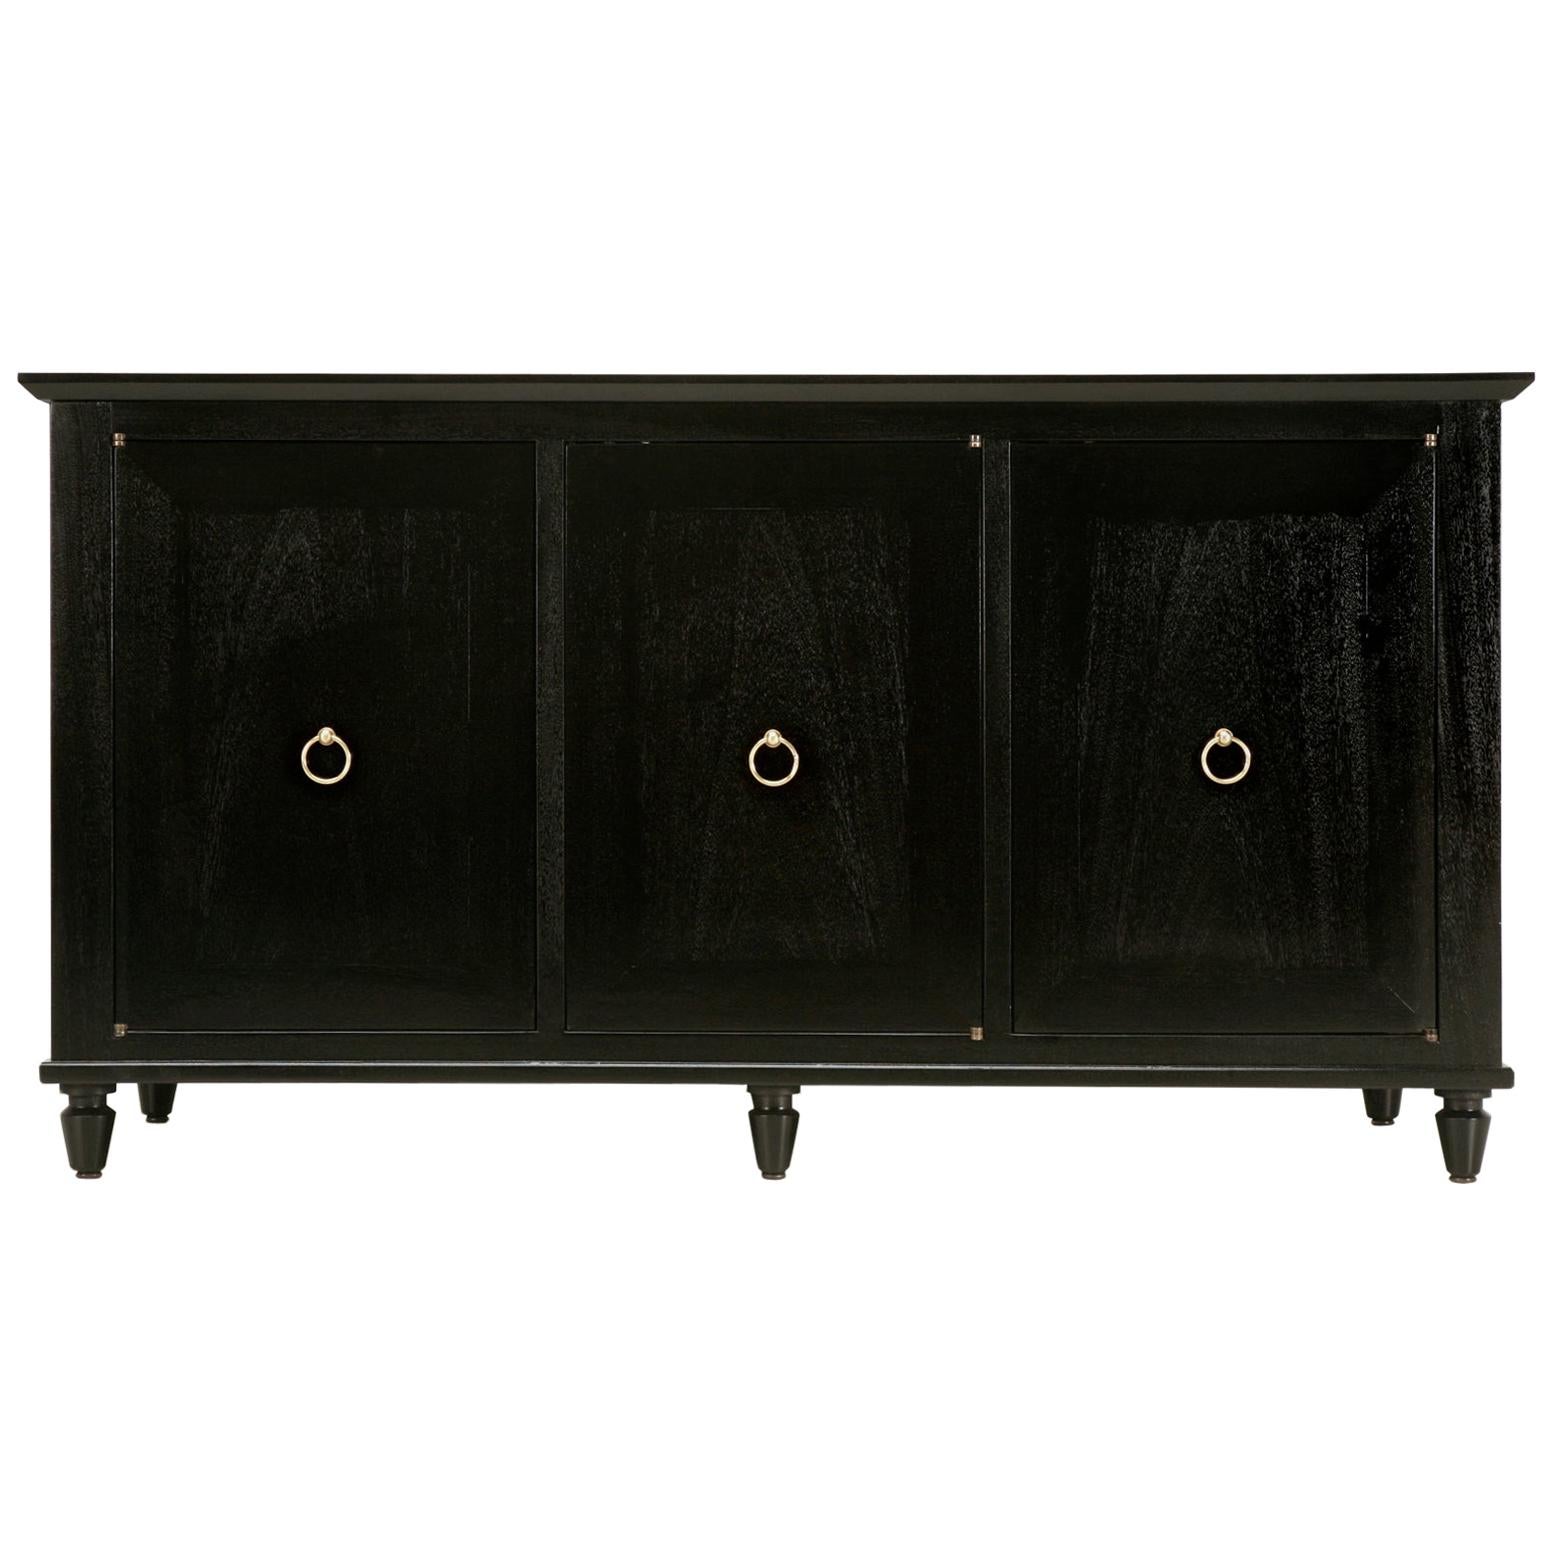 Ebonized Credenza or Buffet, Handmade in Chicago in Any Dimension or Finish